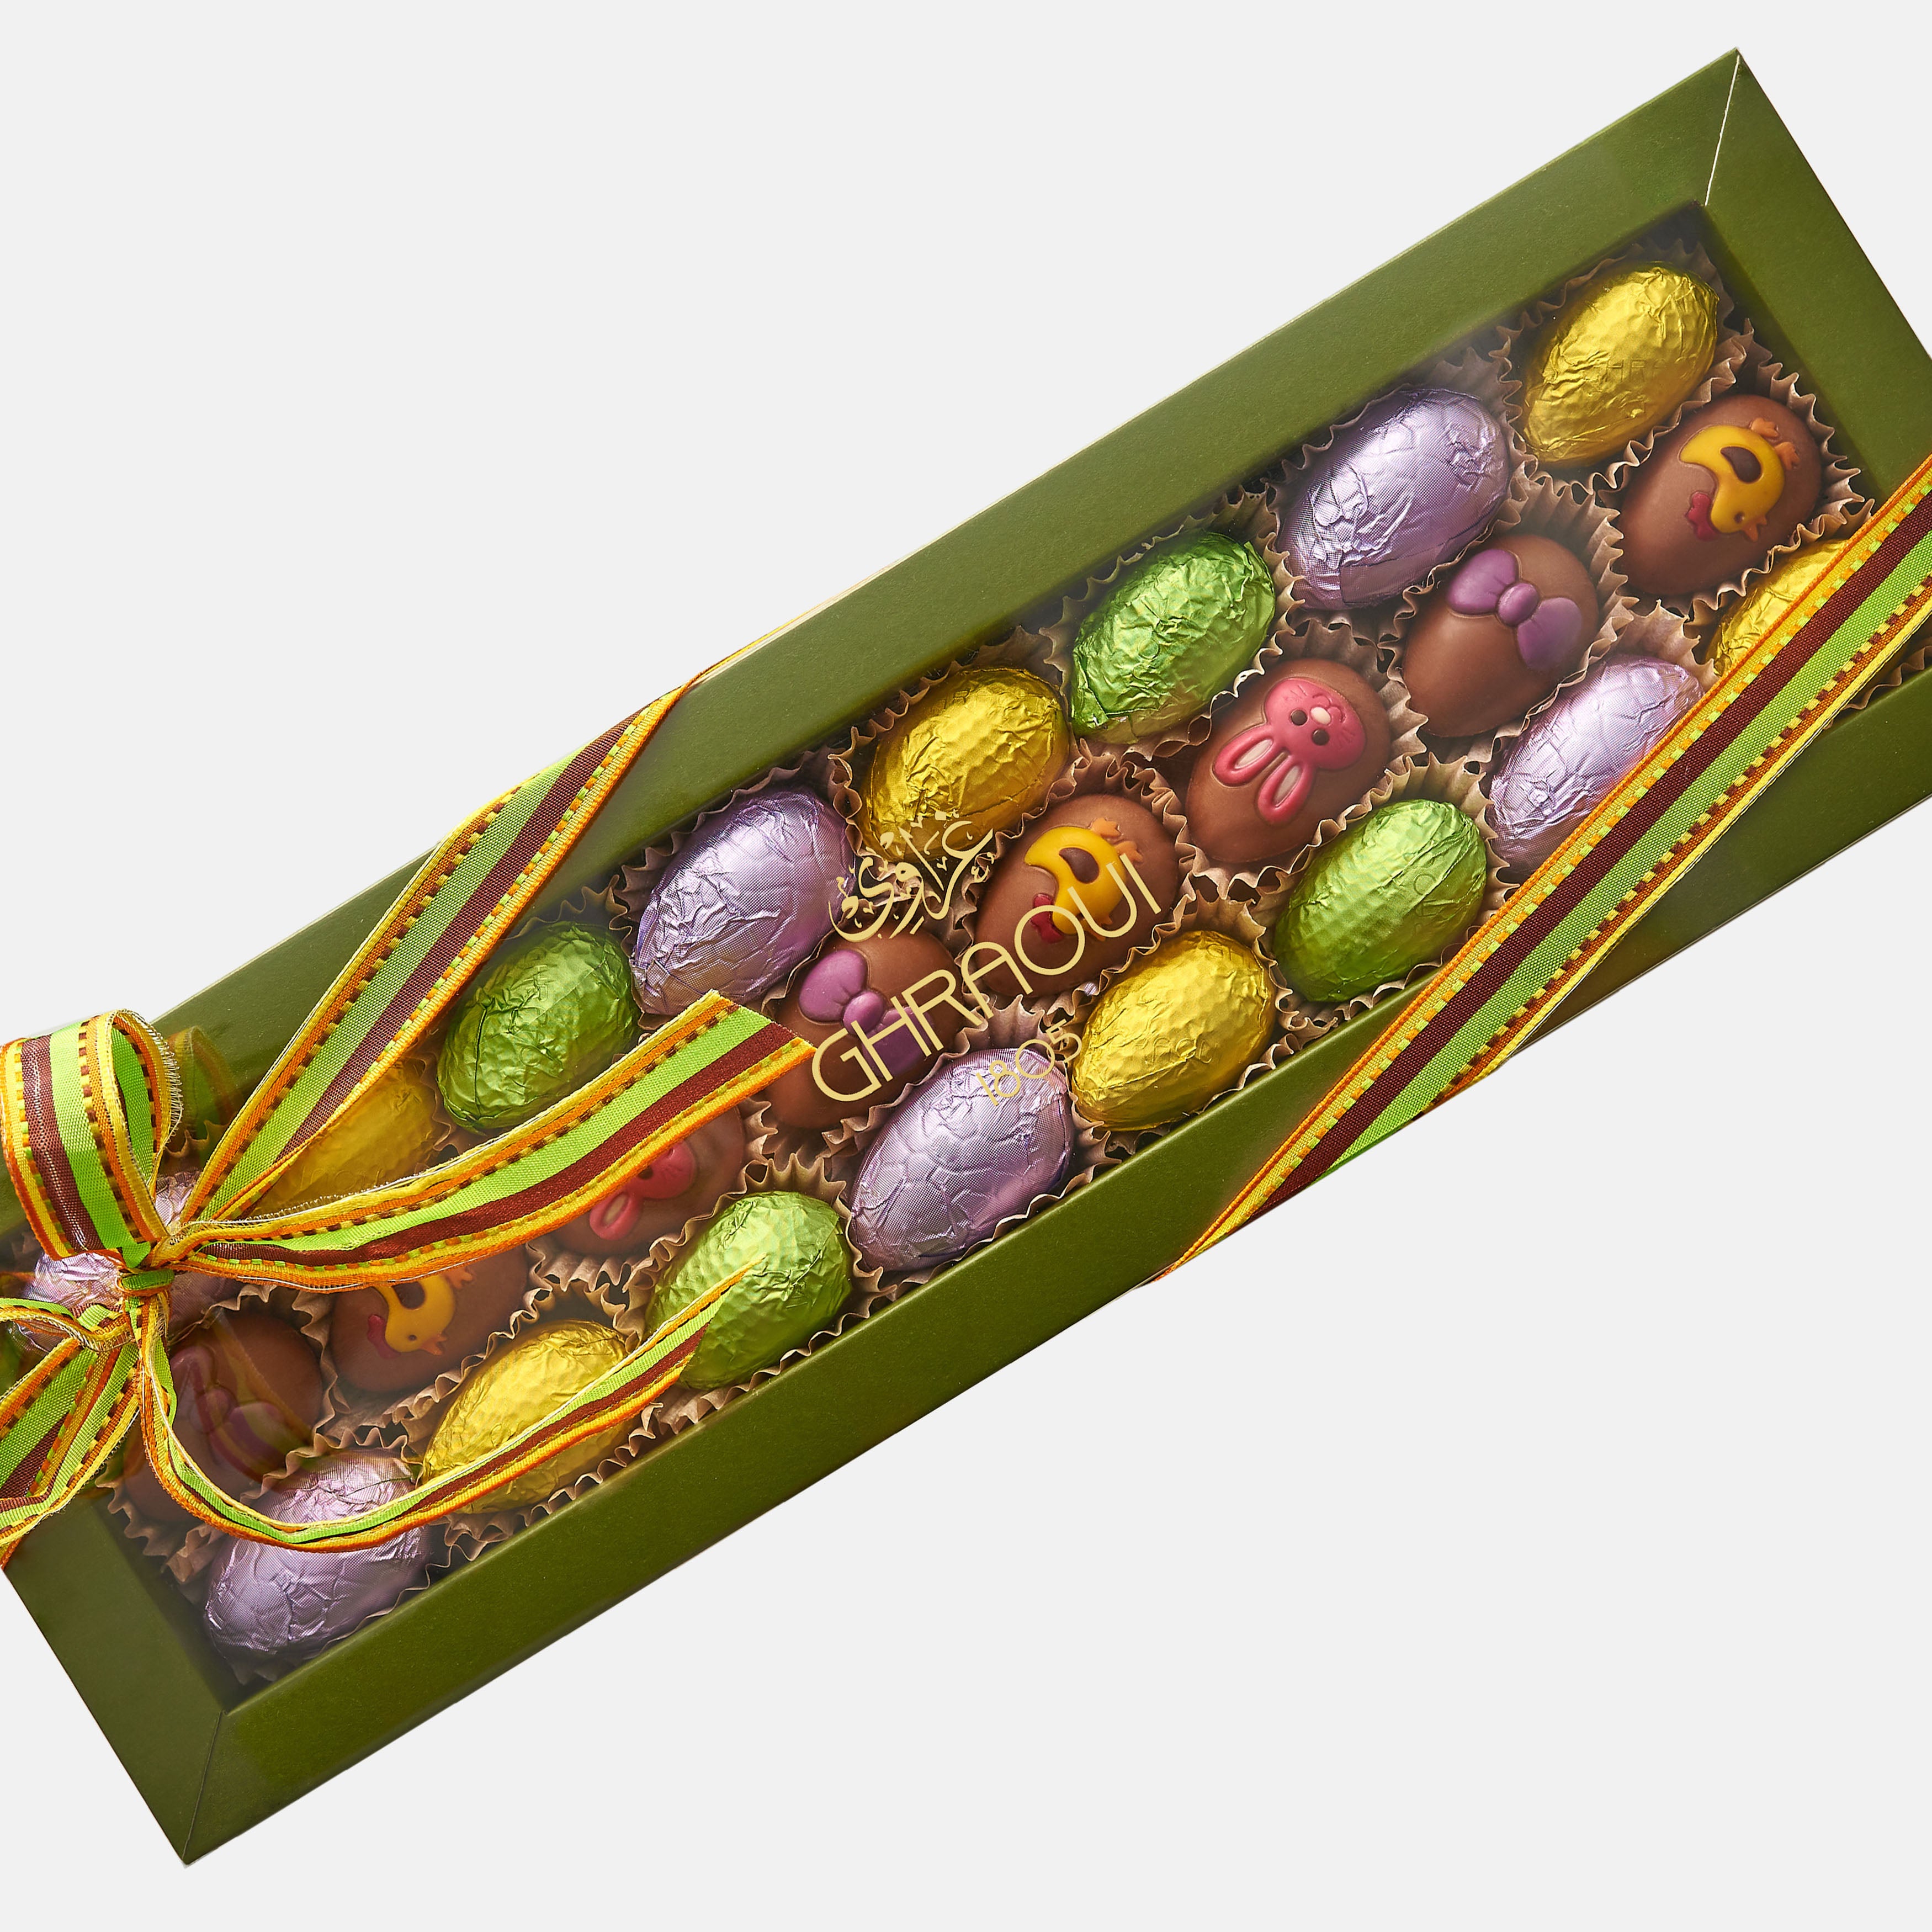 Medio Easter Chocolate Selection